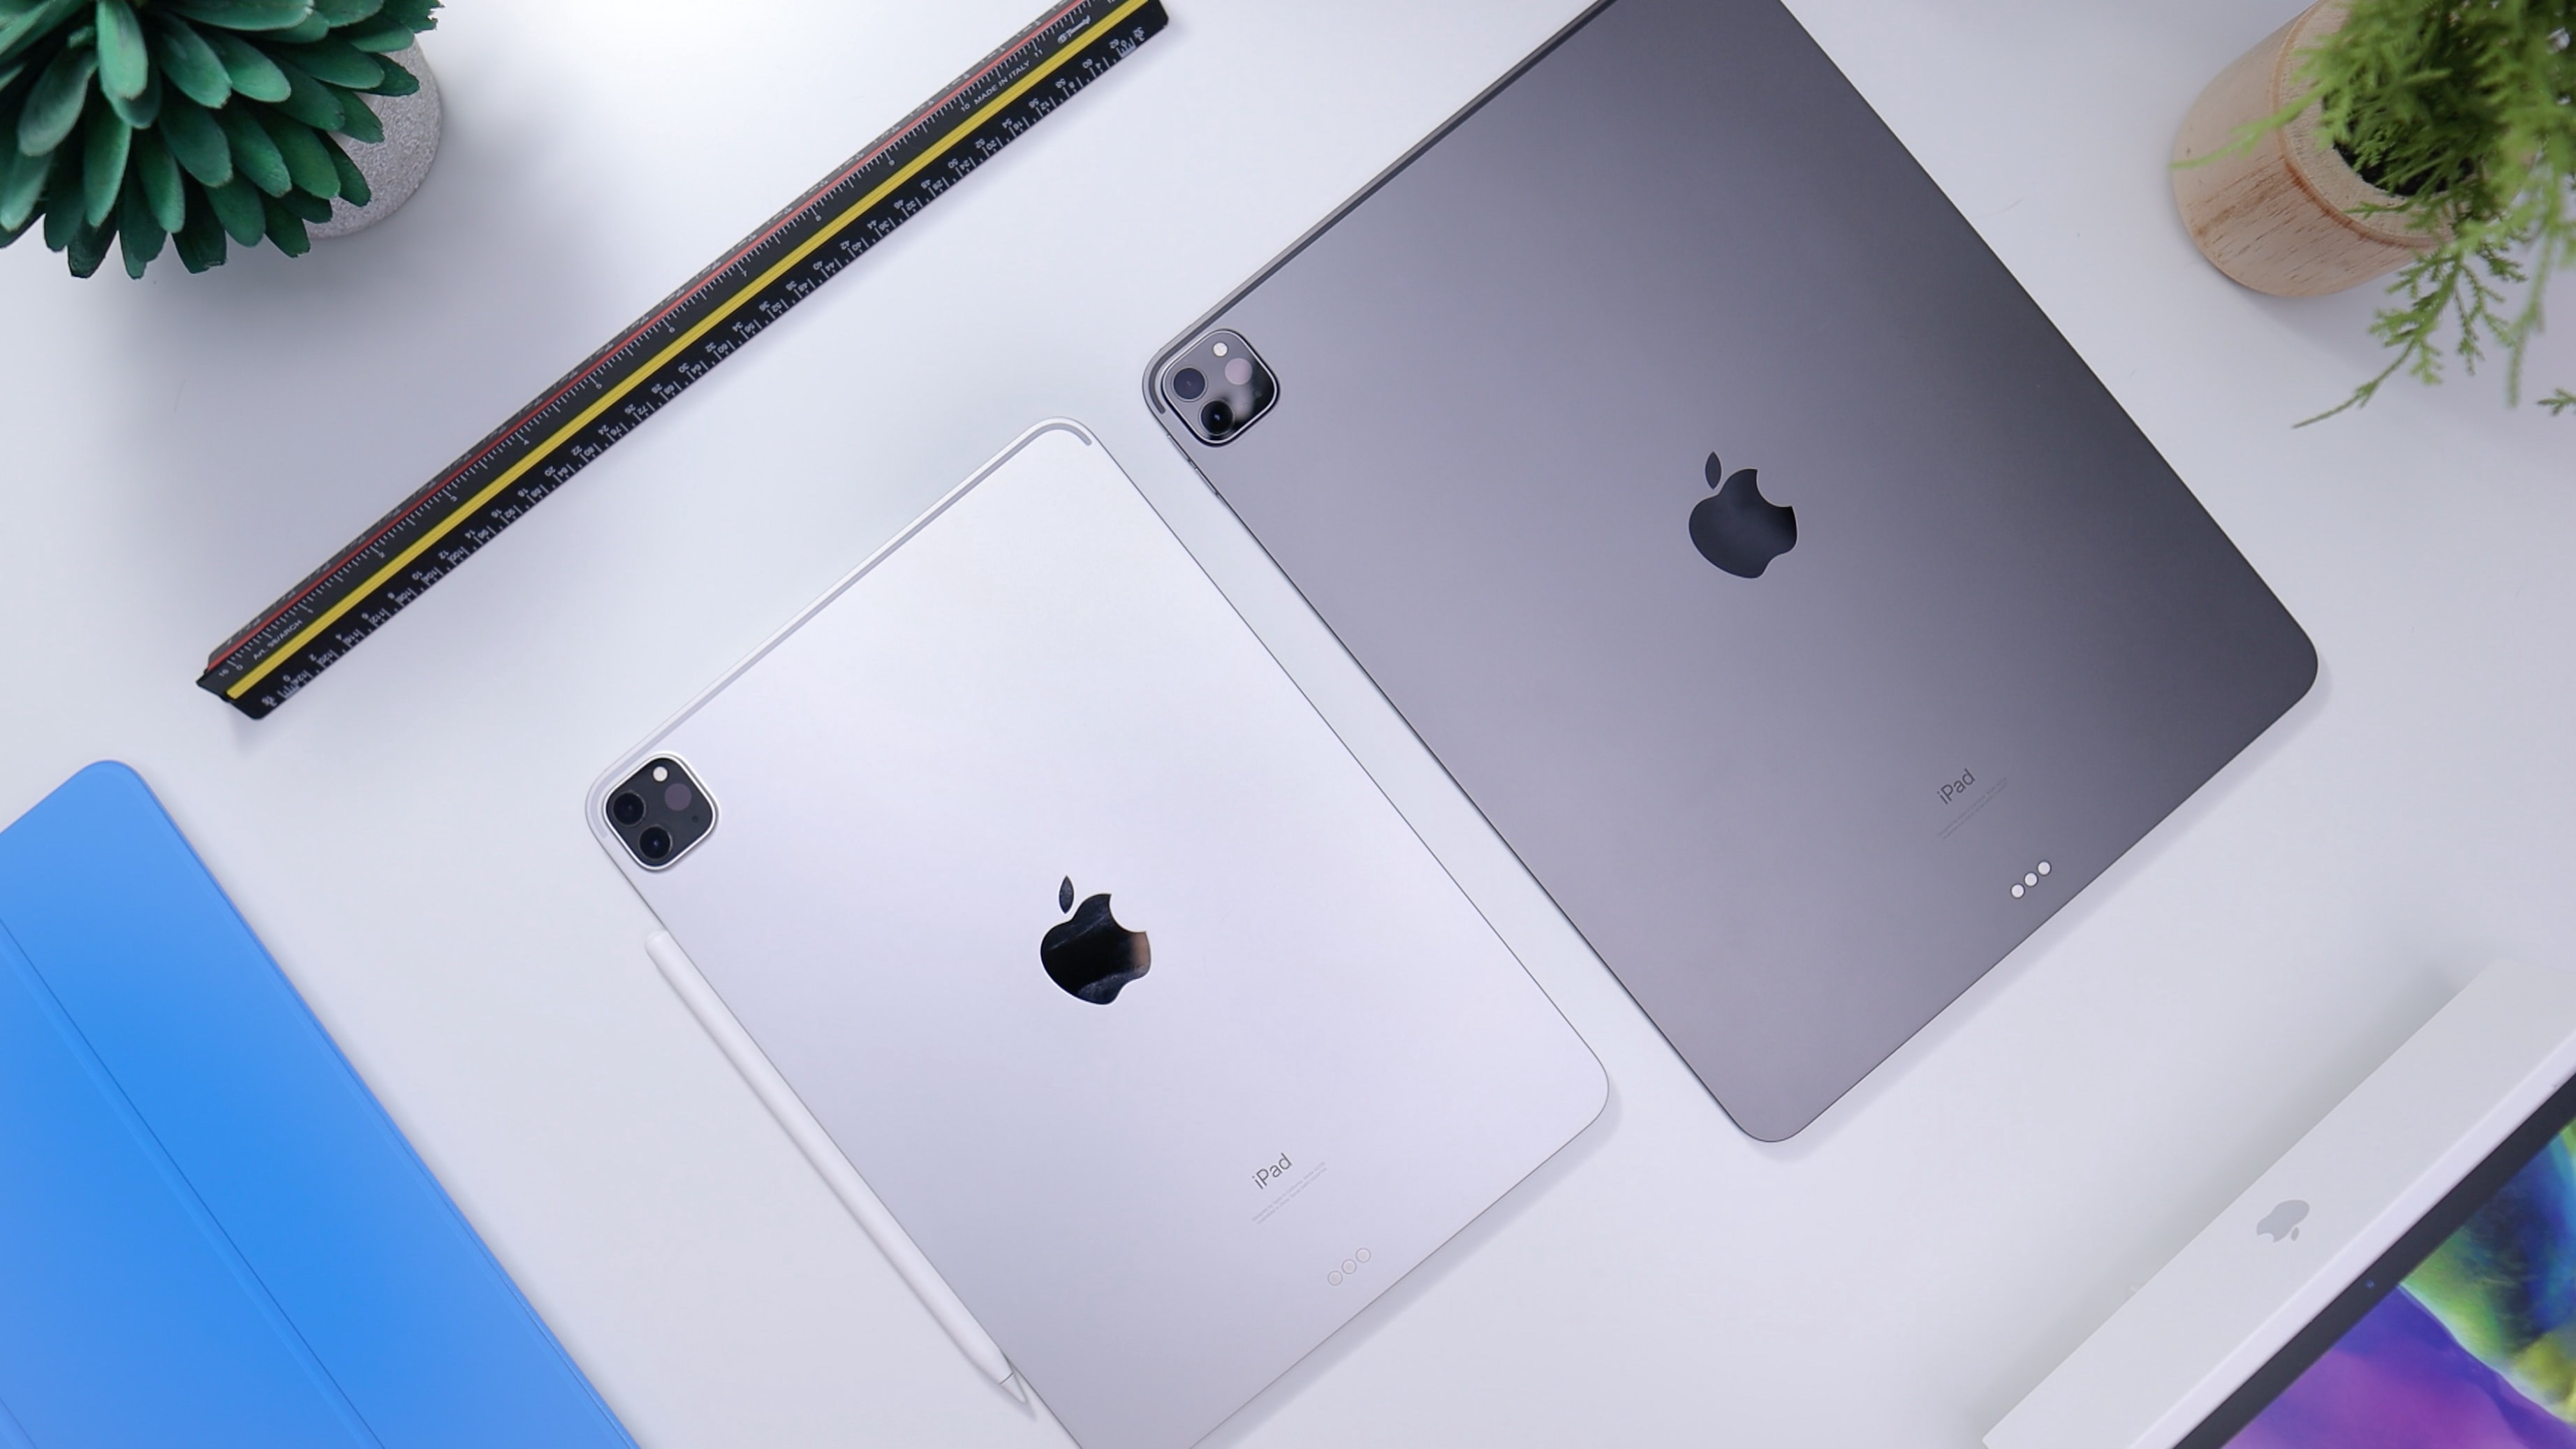 New iPad Pro 12.9 Rumors: Is The First 5G iPad Pro Worth Buying?